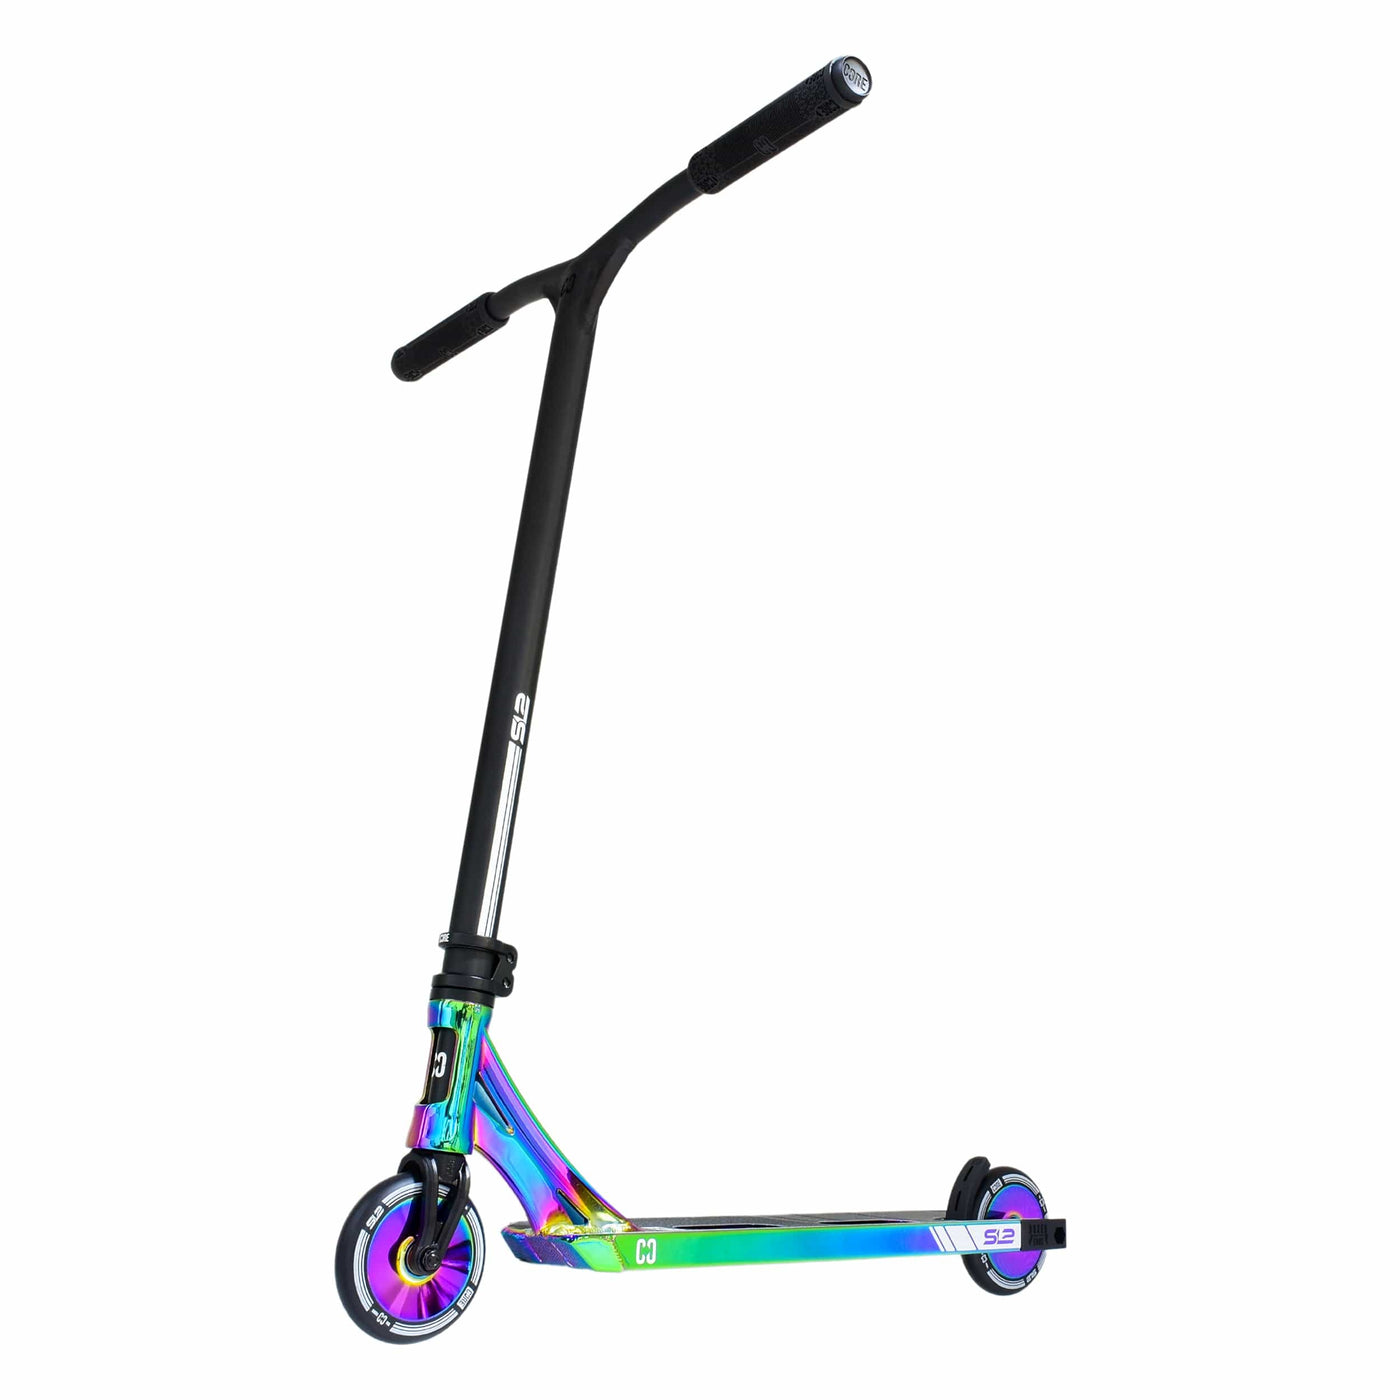 CORE SL2 Stunt Scooter Neo Black I Adult Stunt Scooter View Angled Alternate